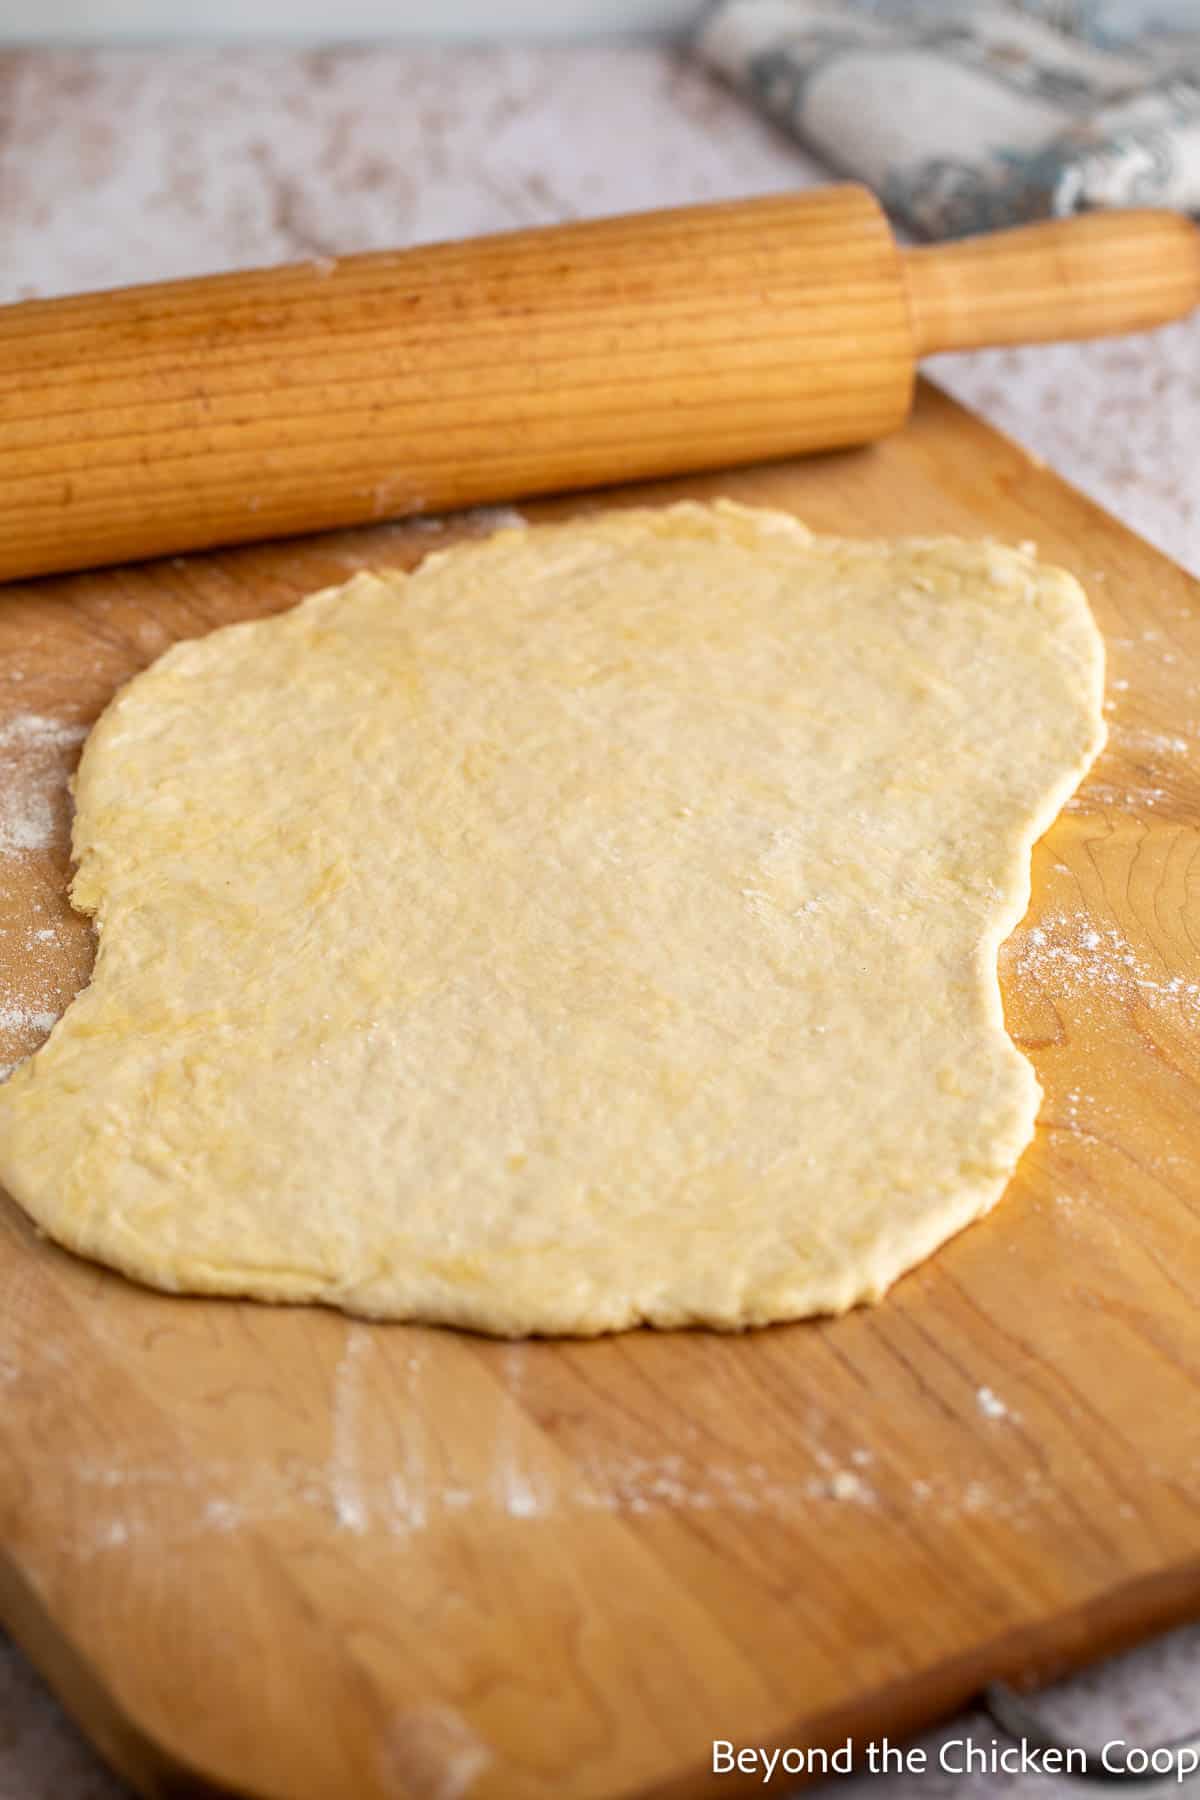 Rolled out cracker dough on a wooden board. 